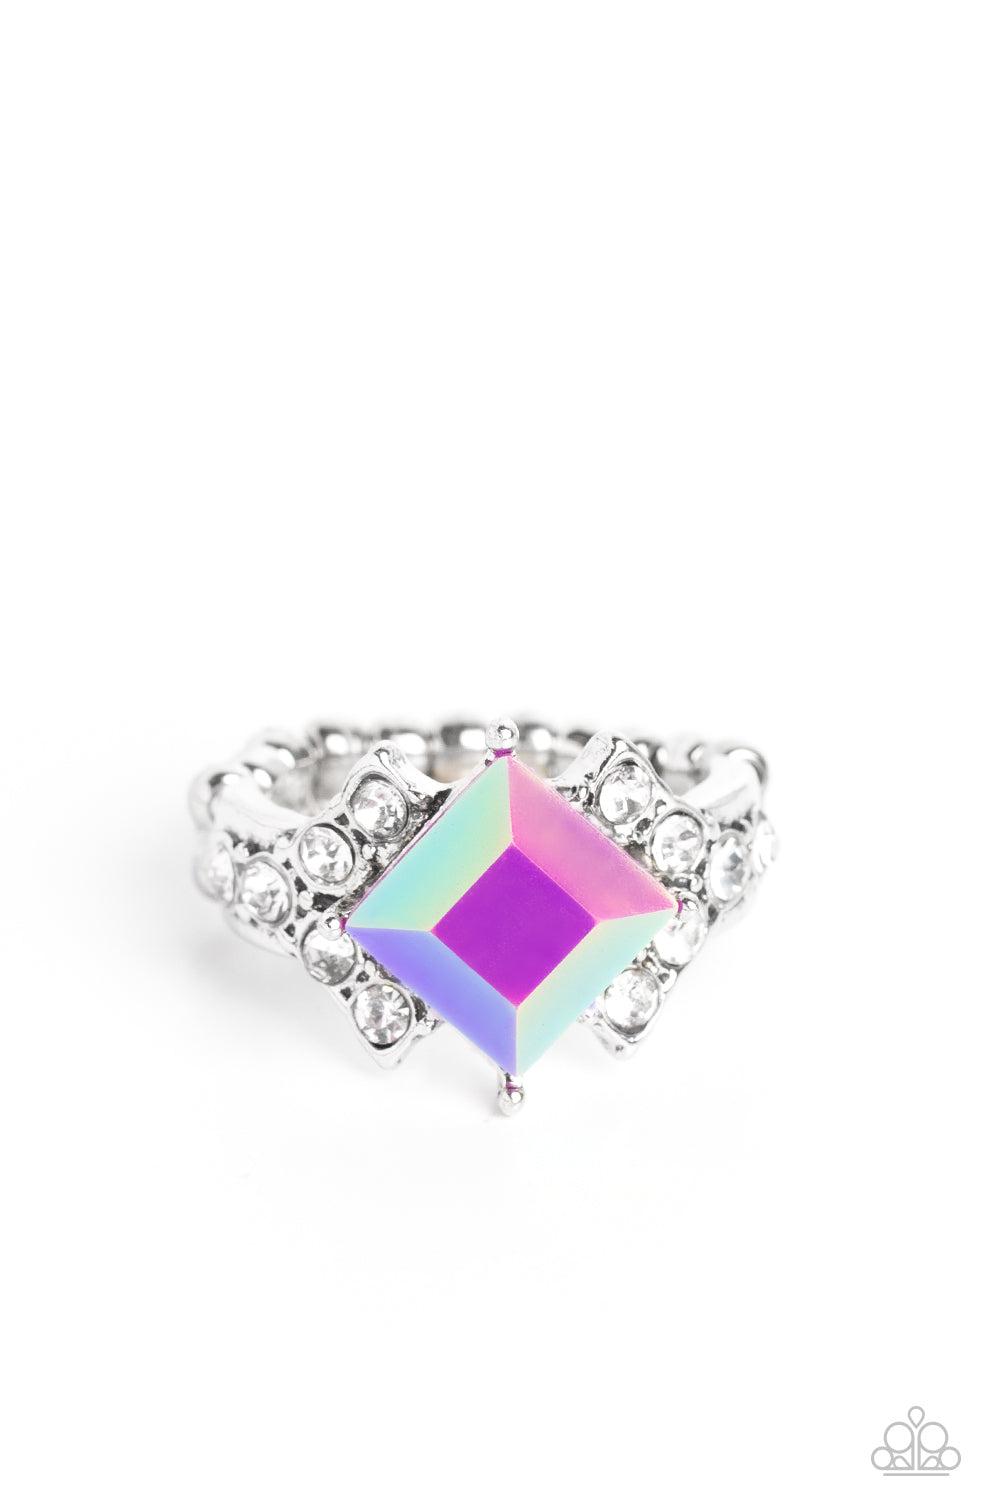 Mind-Blowing Brilliance Purple Ring - Paparazzi Accessories- lightbox - CarasShop.com - $5 Jewelry by Cara Jewels